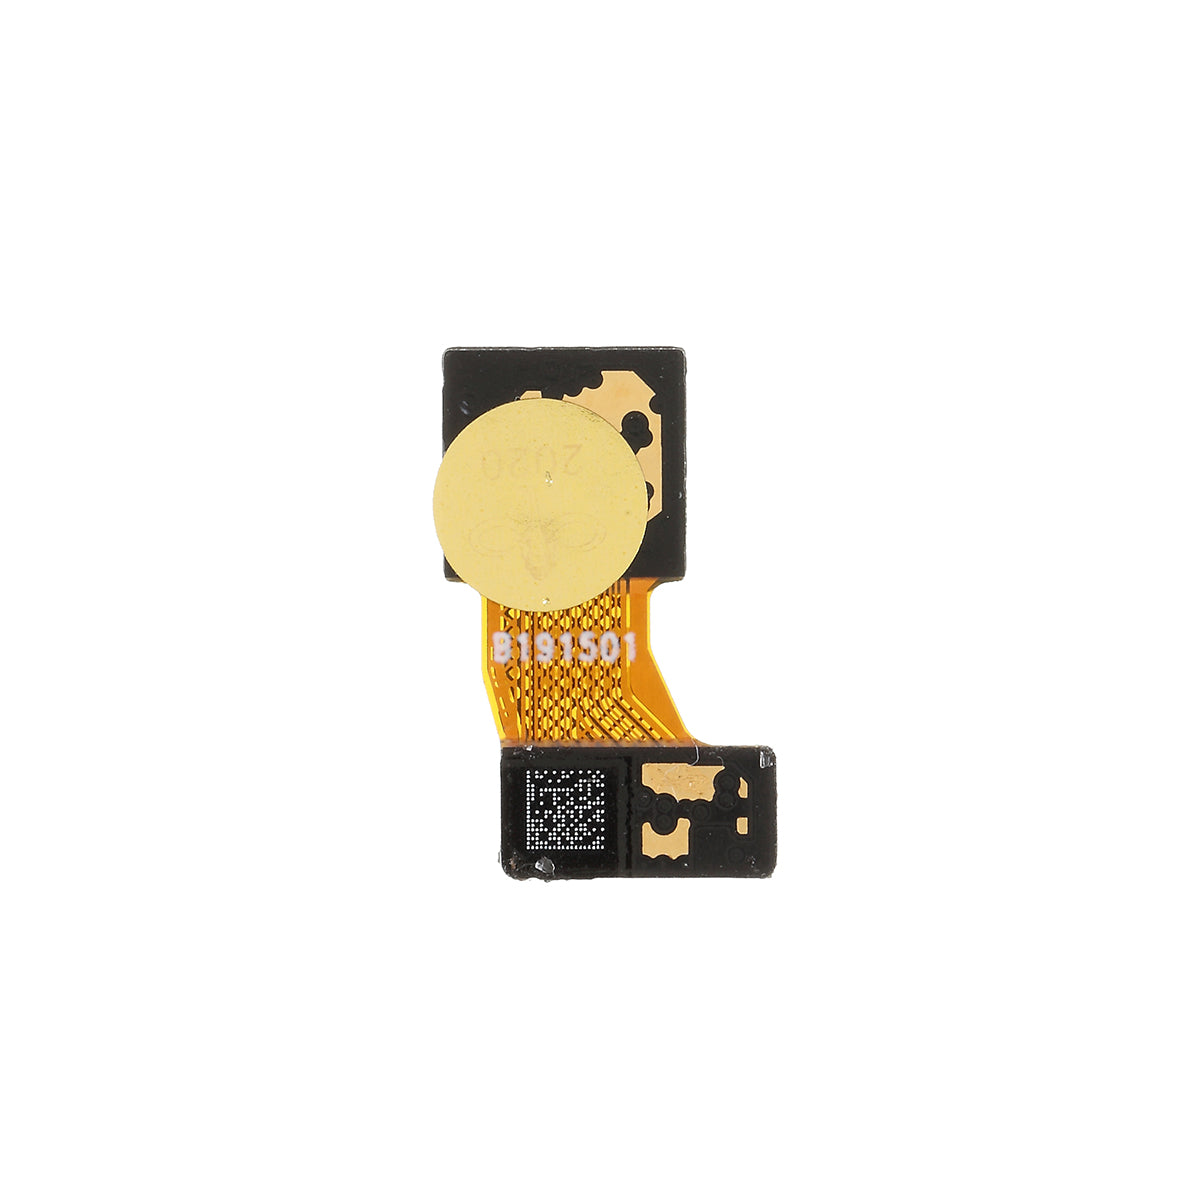 OEM Front Facing Camera Module Replace Part for Xiaomi Redmi 8/8A